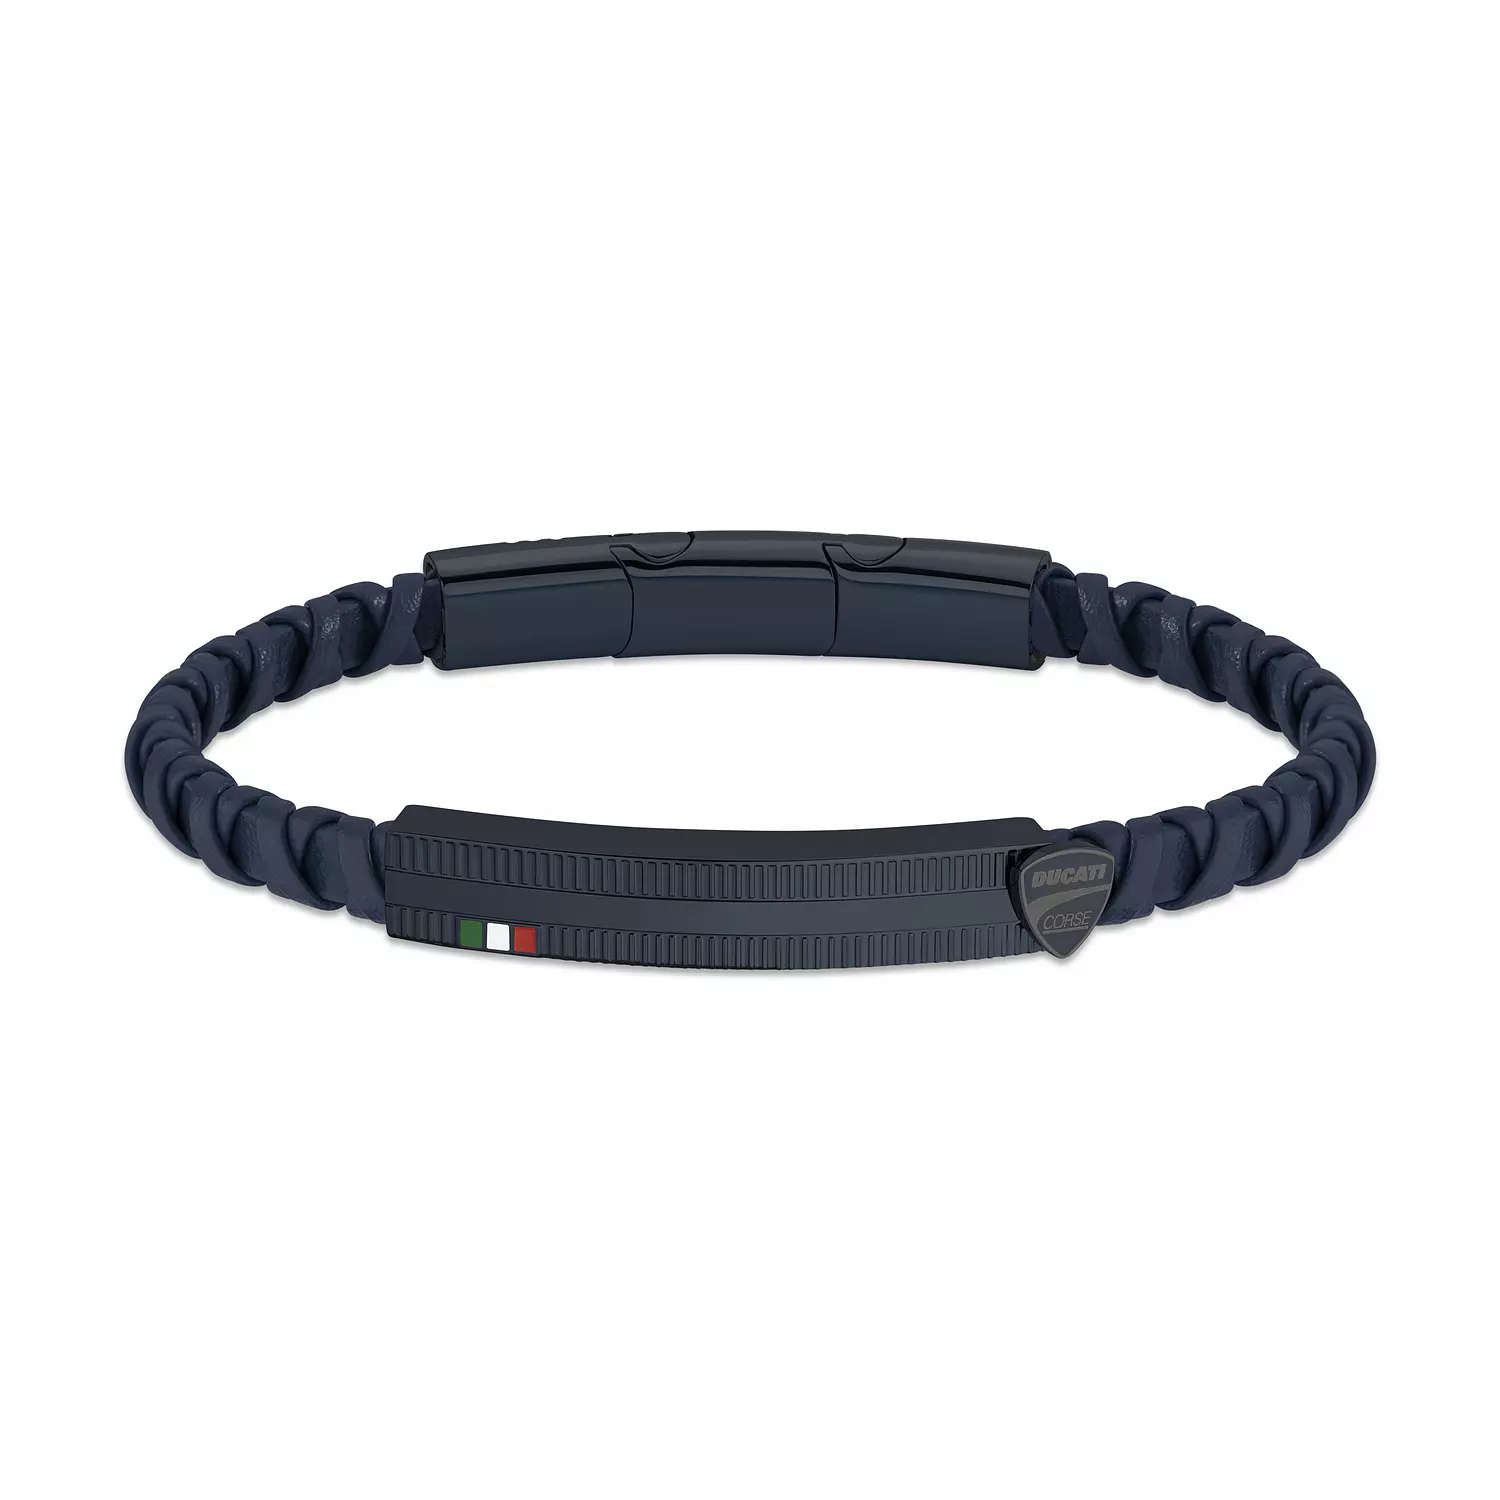 Ducati - DTAGB2137004 - INCROCIO BLUE LEATHER WITH IP BLUE BRACELET hover image